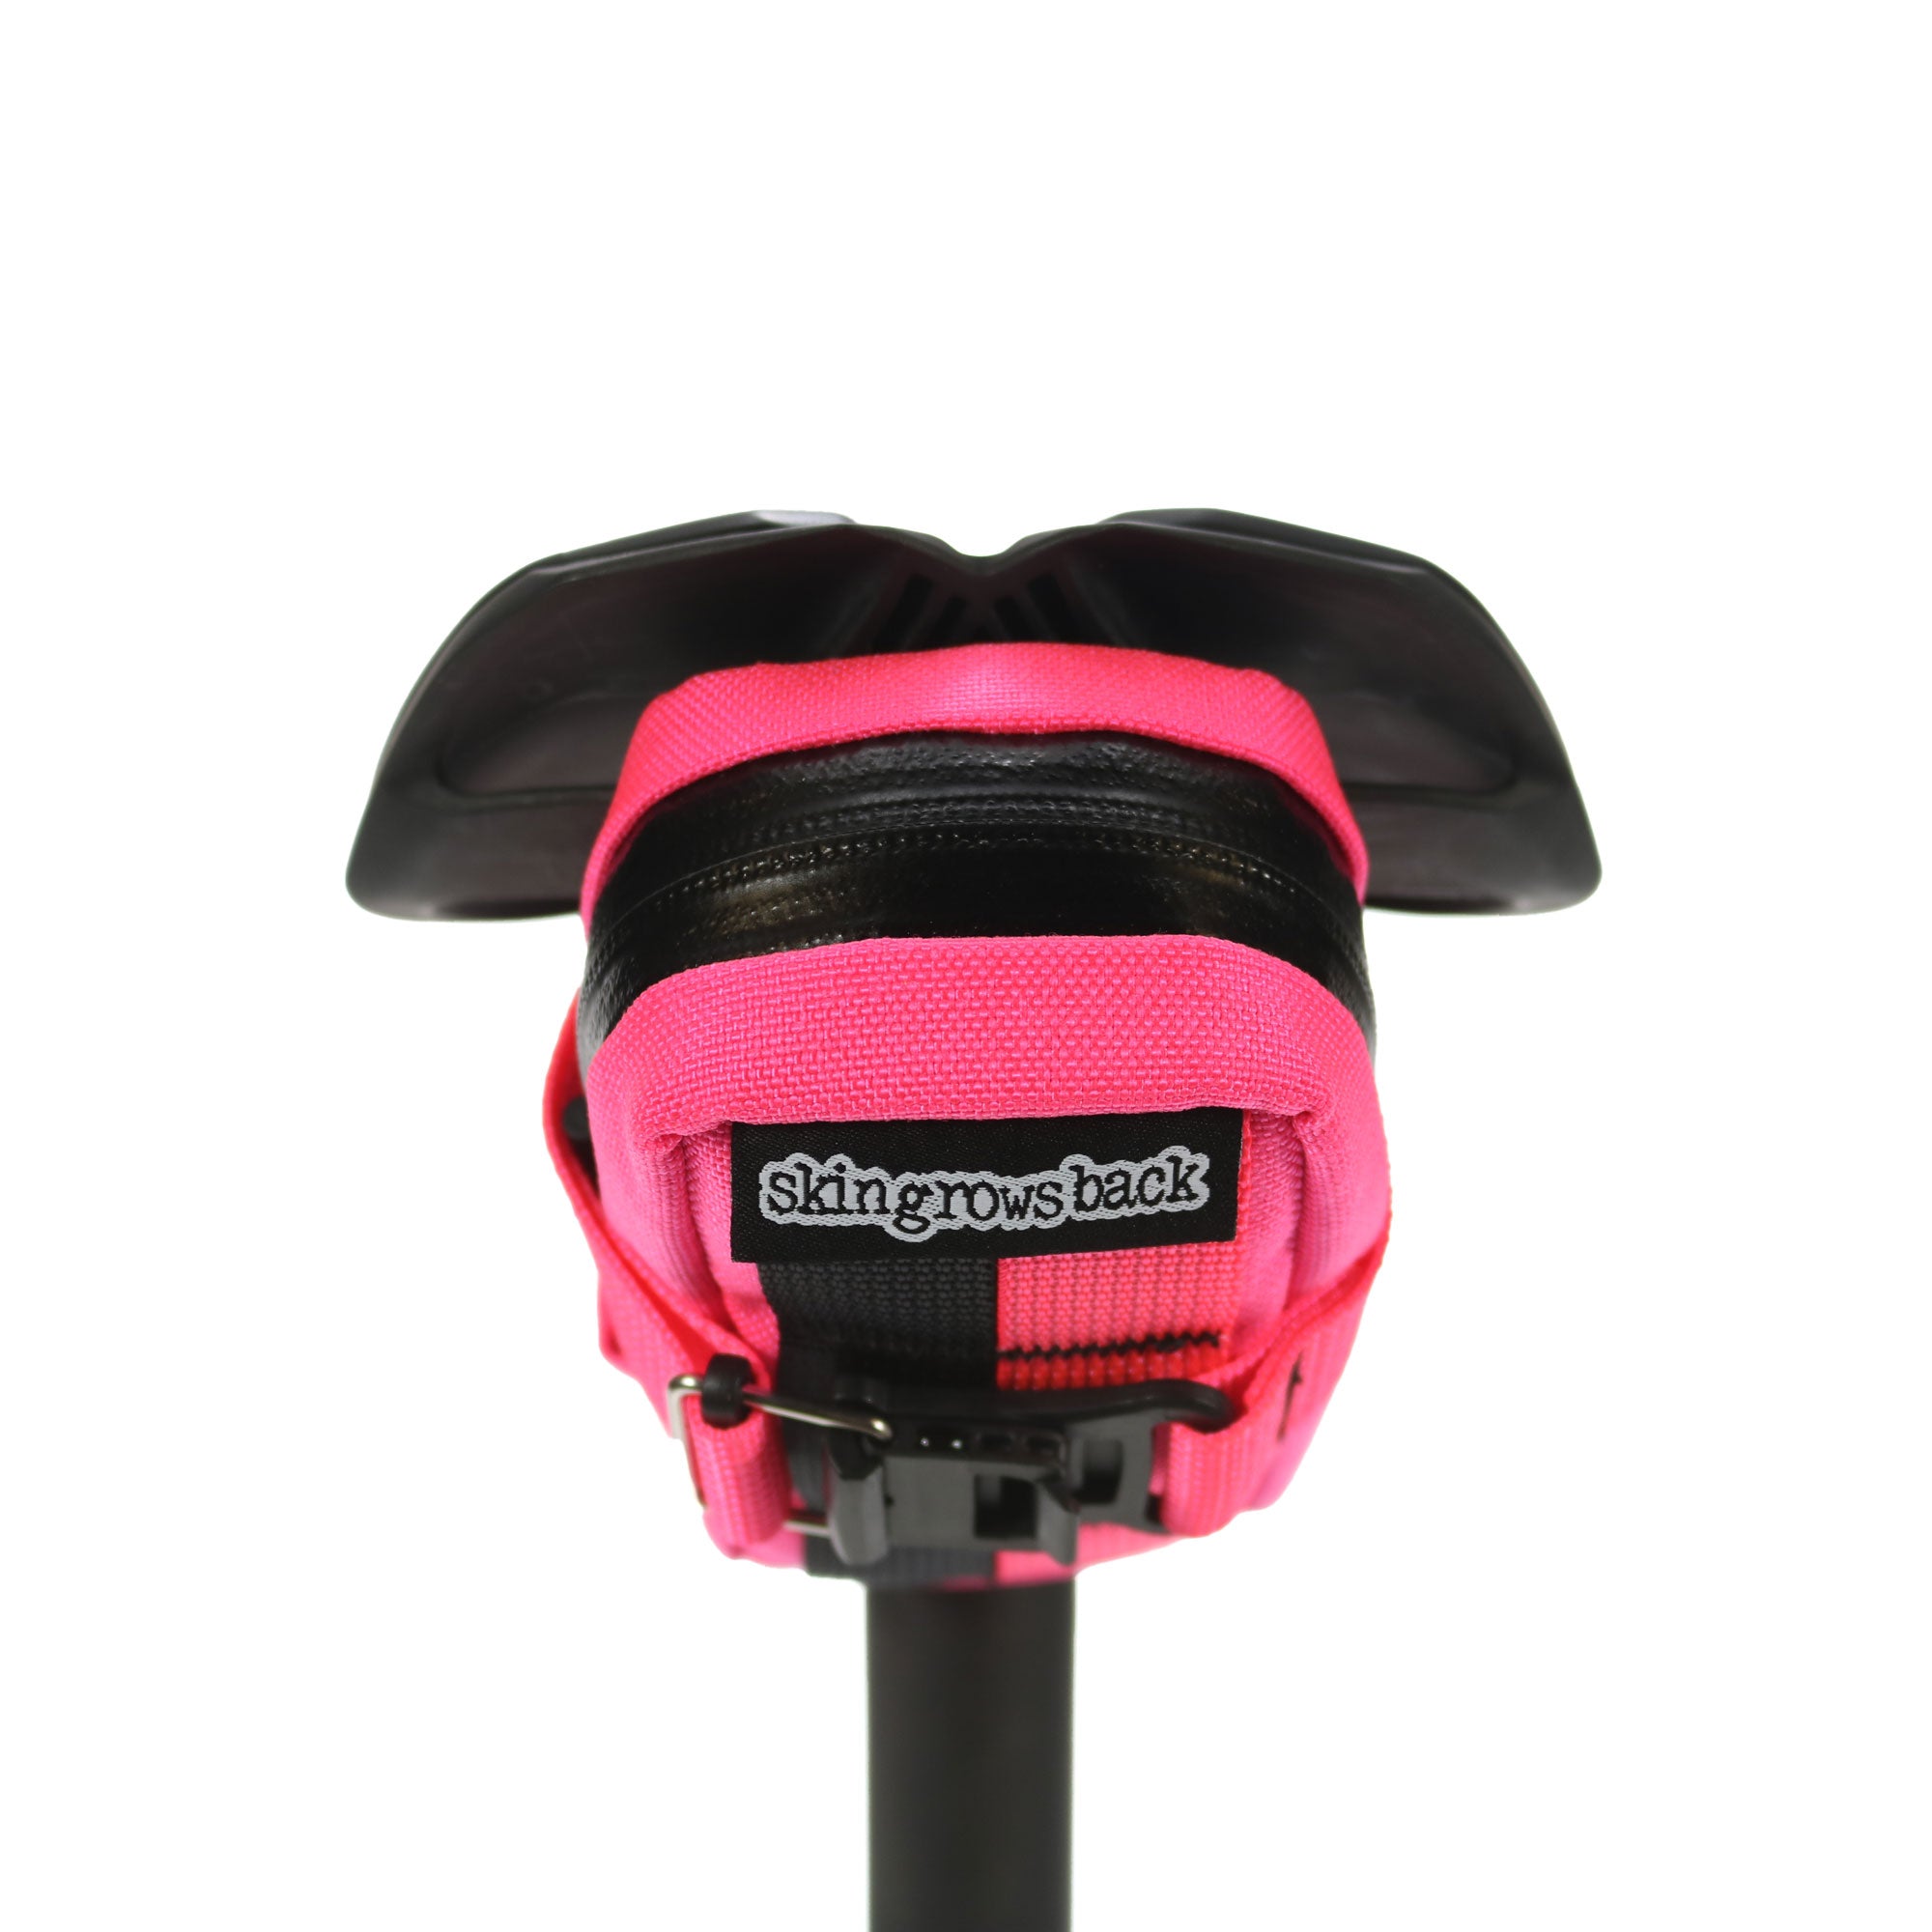 Plan B saddle bag Neon Pink - Carry a spare tube, CO2 cartridge